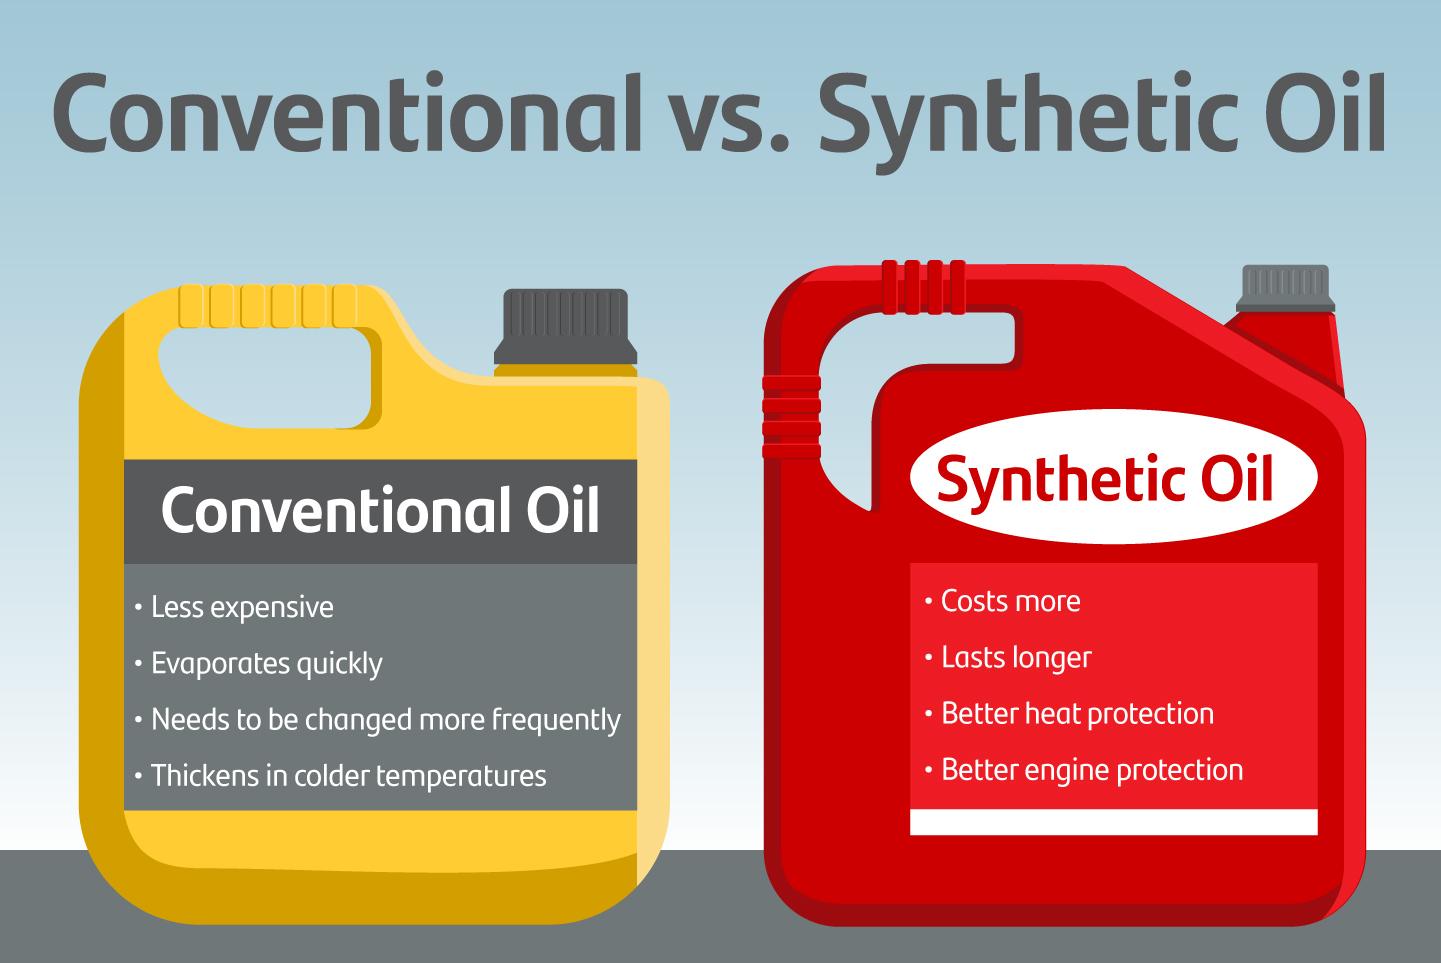 synthetic-oil-vs-conventional-oil-sale-store-save-52-jlcatj-gob-mx